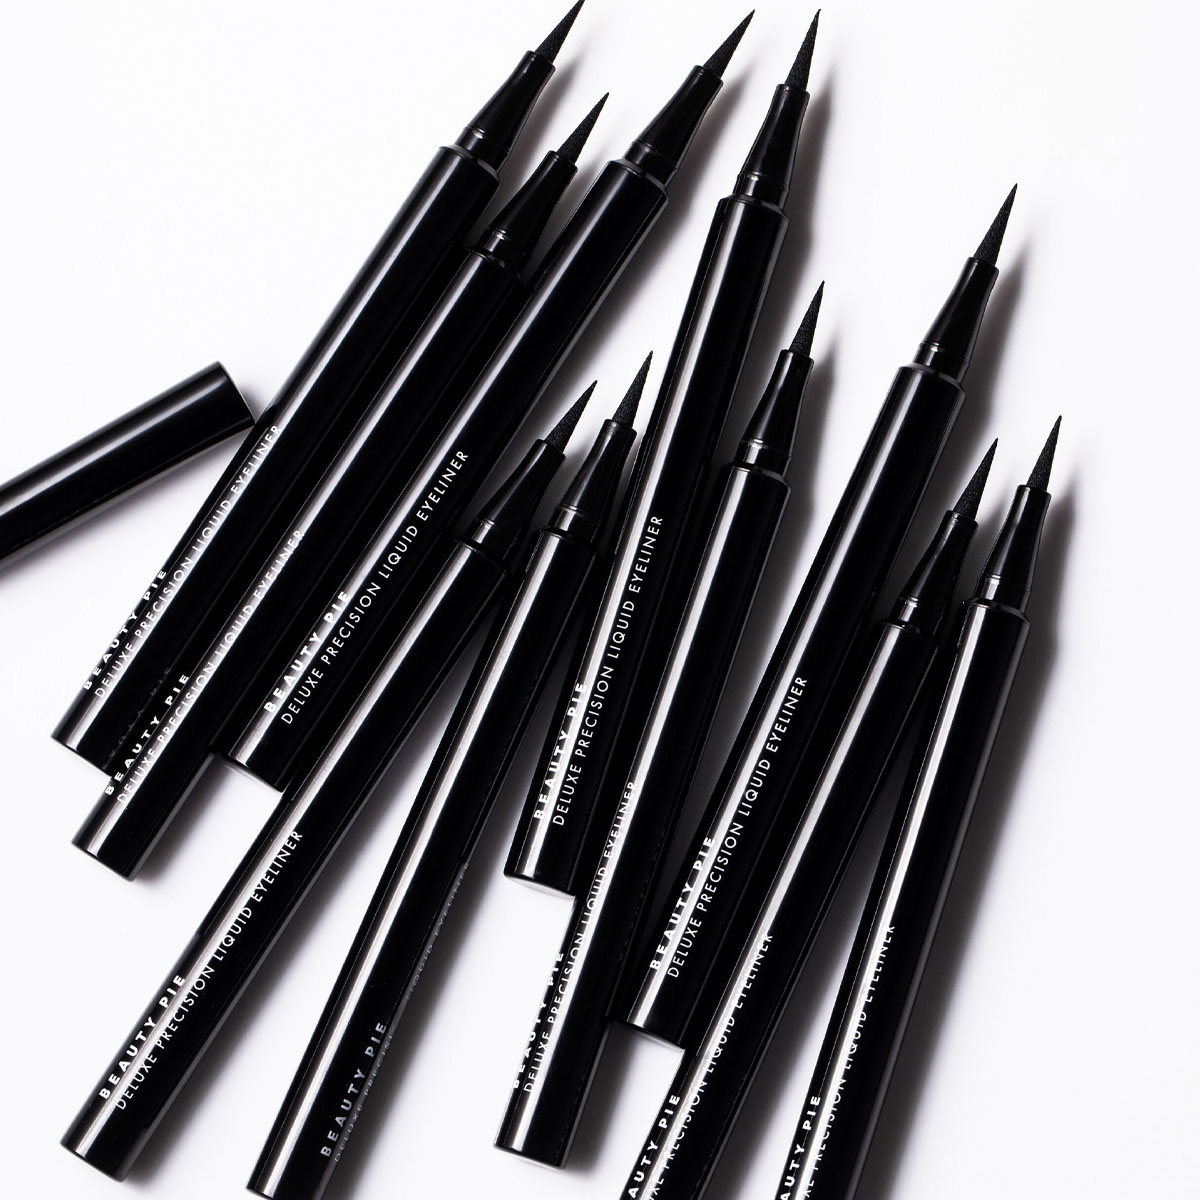 10 beauty pie eyeliners laying in a row with tops off